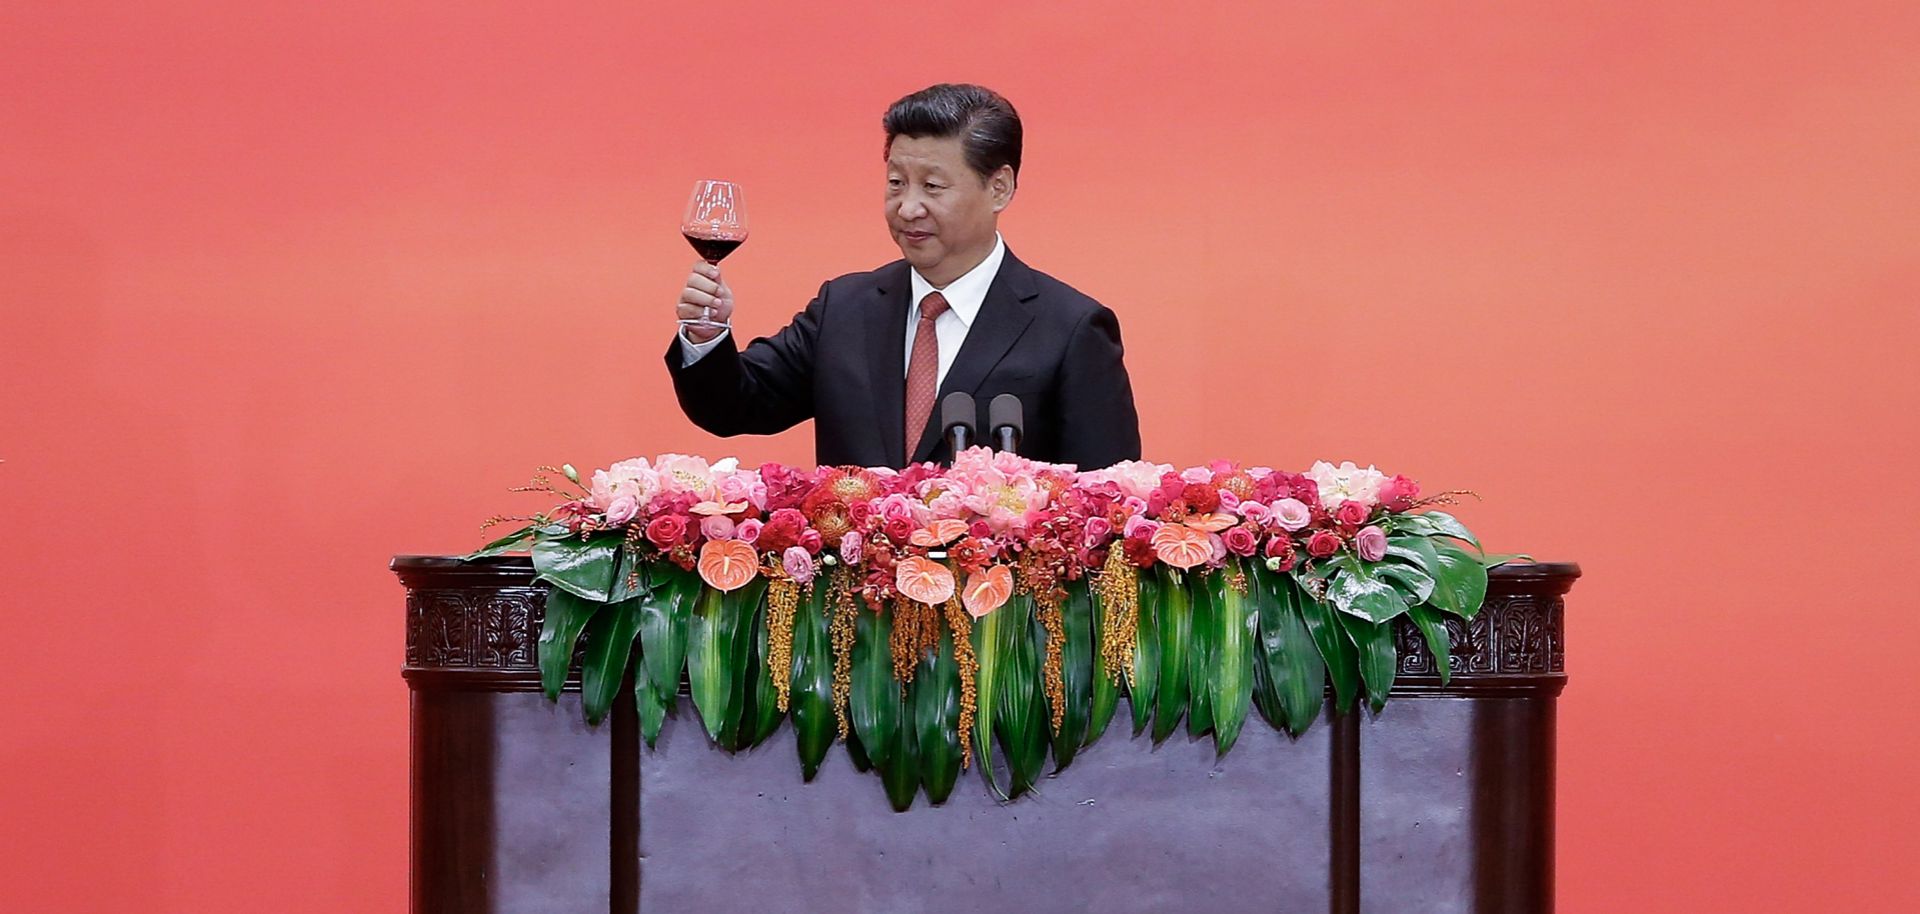 Chinese President Xi Jinping delivers a speech in September, 2015.